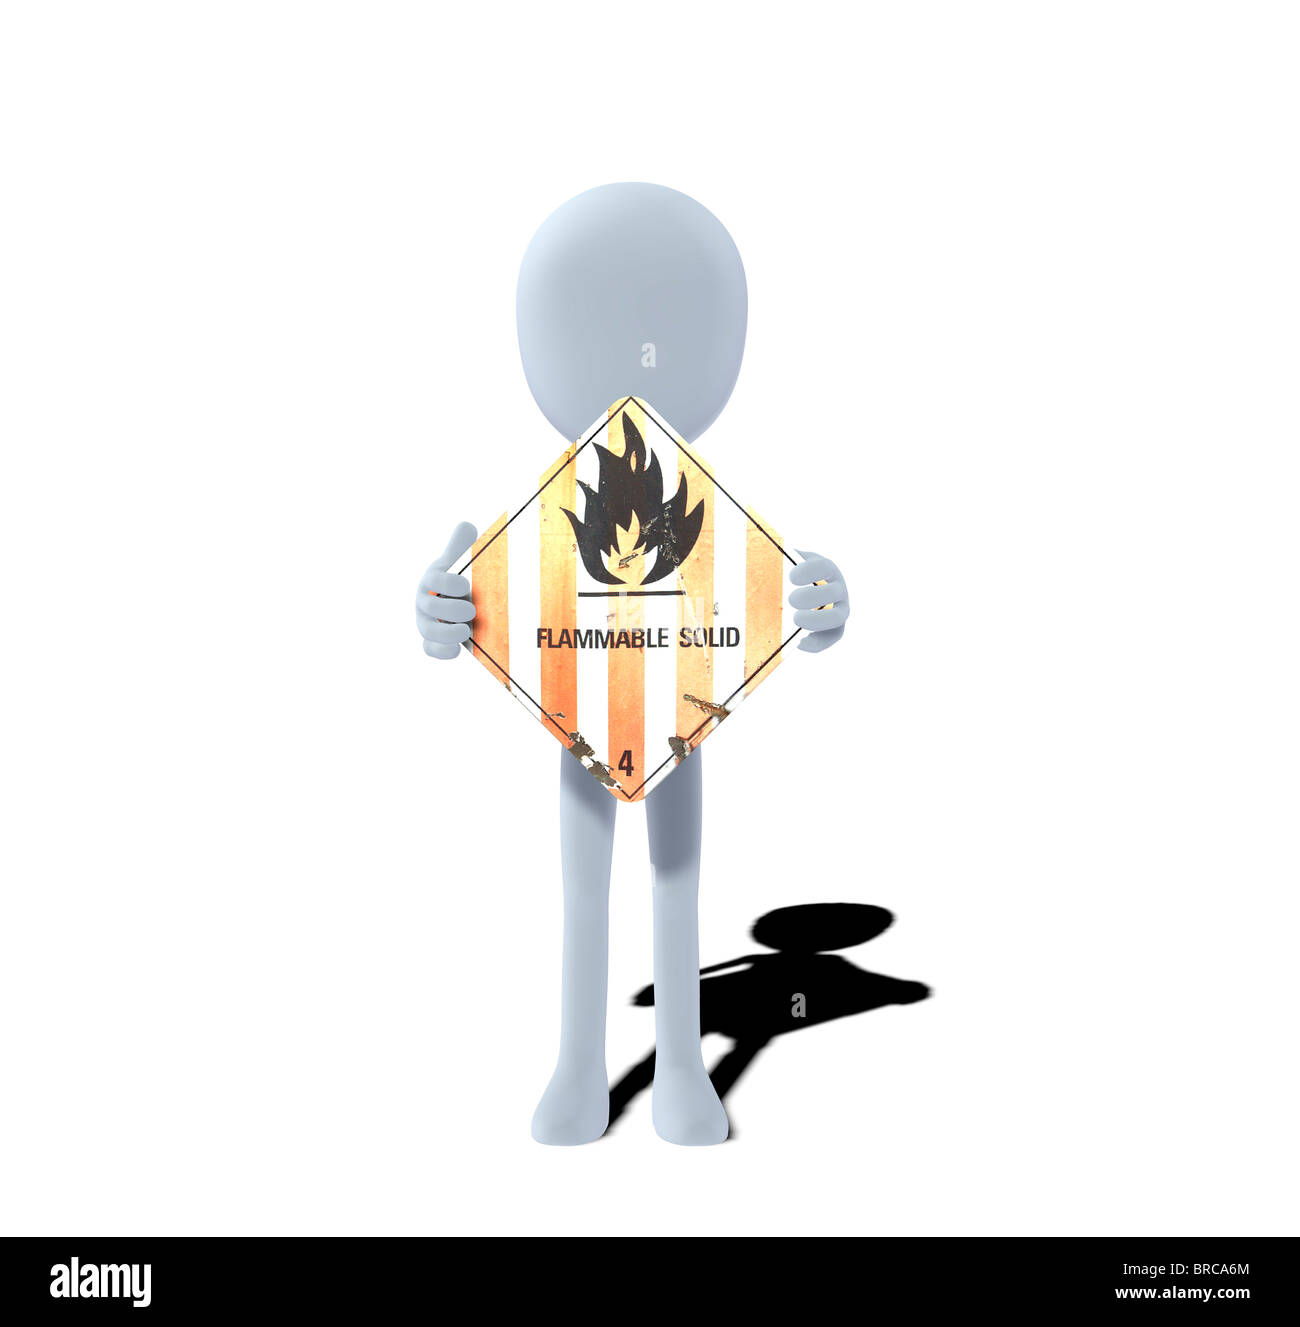 concept figure with warning sign flammable solids Stock Photo